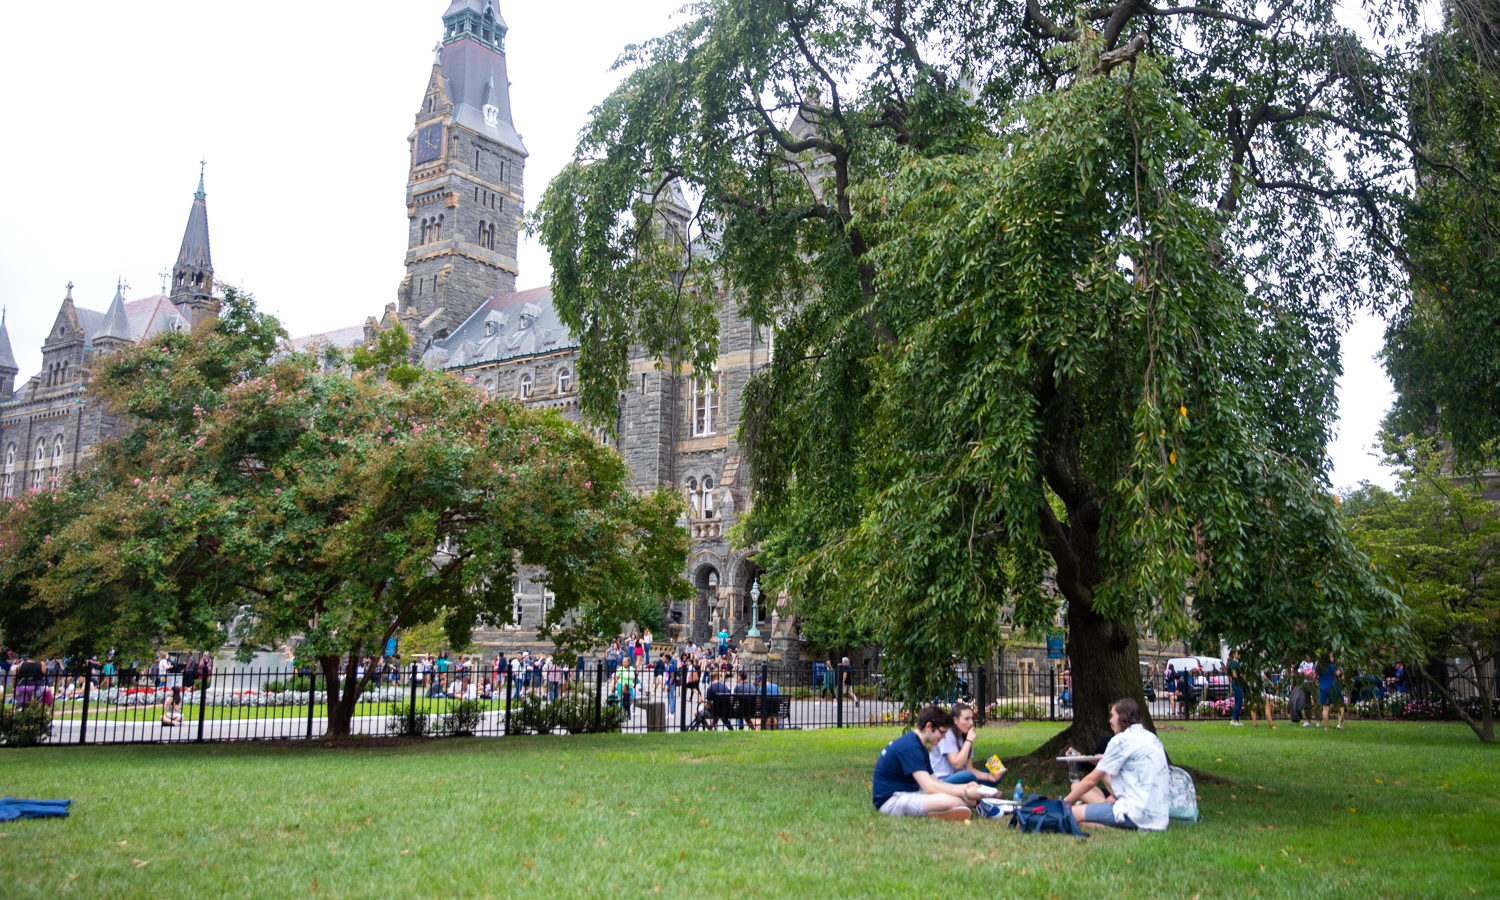 Students sit on Healy Lawn and chat on a sunny day, Healy Hall is in the background